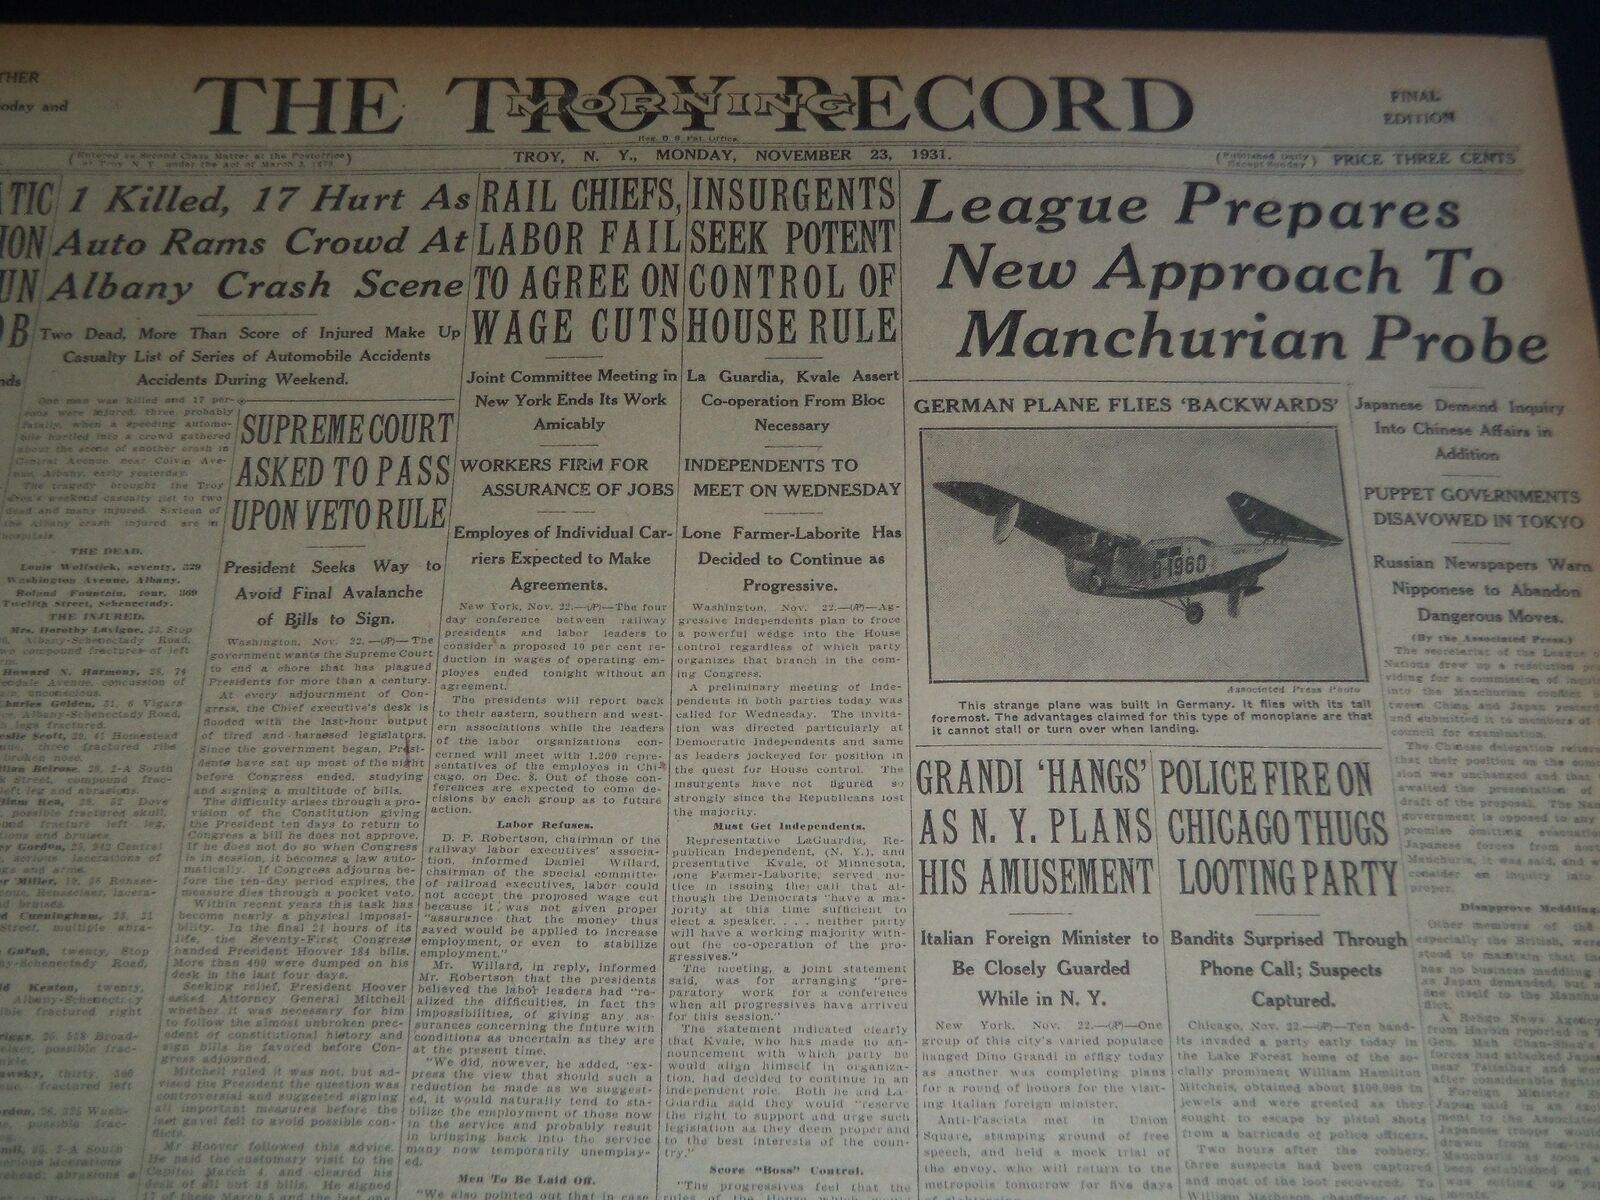 1931 NOV 23 TROY MORNING RECORD - NEW APPROACH TO MANCHURIA PROBE - NT 7475